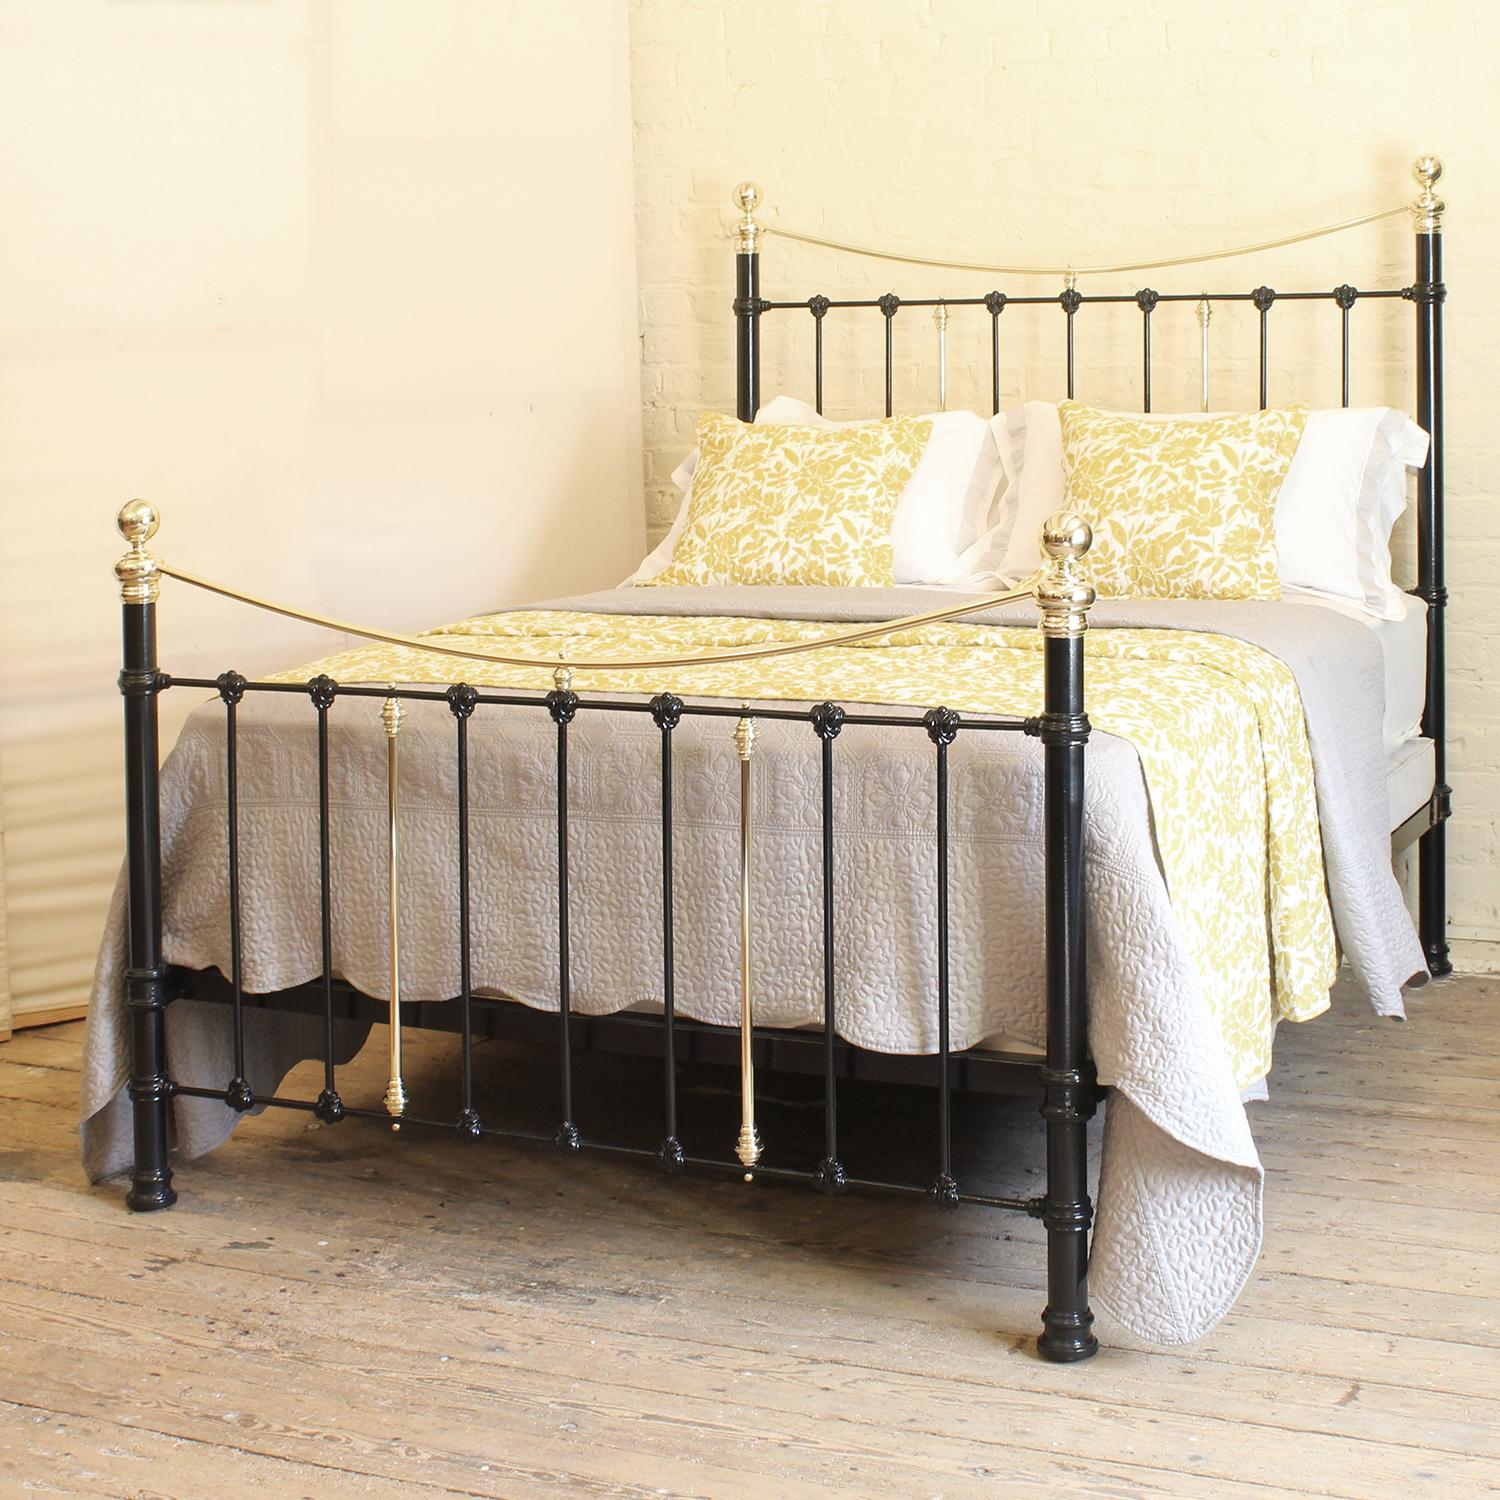 An attractive cast iron Victorian antique bed finished in black with curved brass top rails and decorative castings.

This bed accepts a UK king size or US queen size (5ft, 60in or 150cm wide) base and mattress set.

The price includes a standard